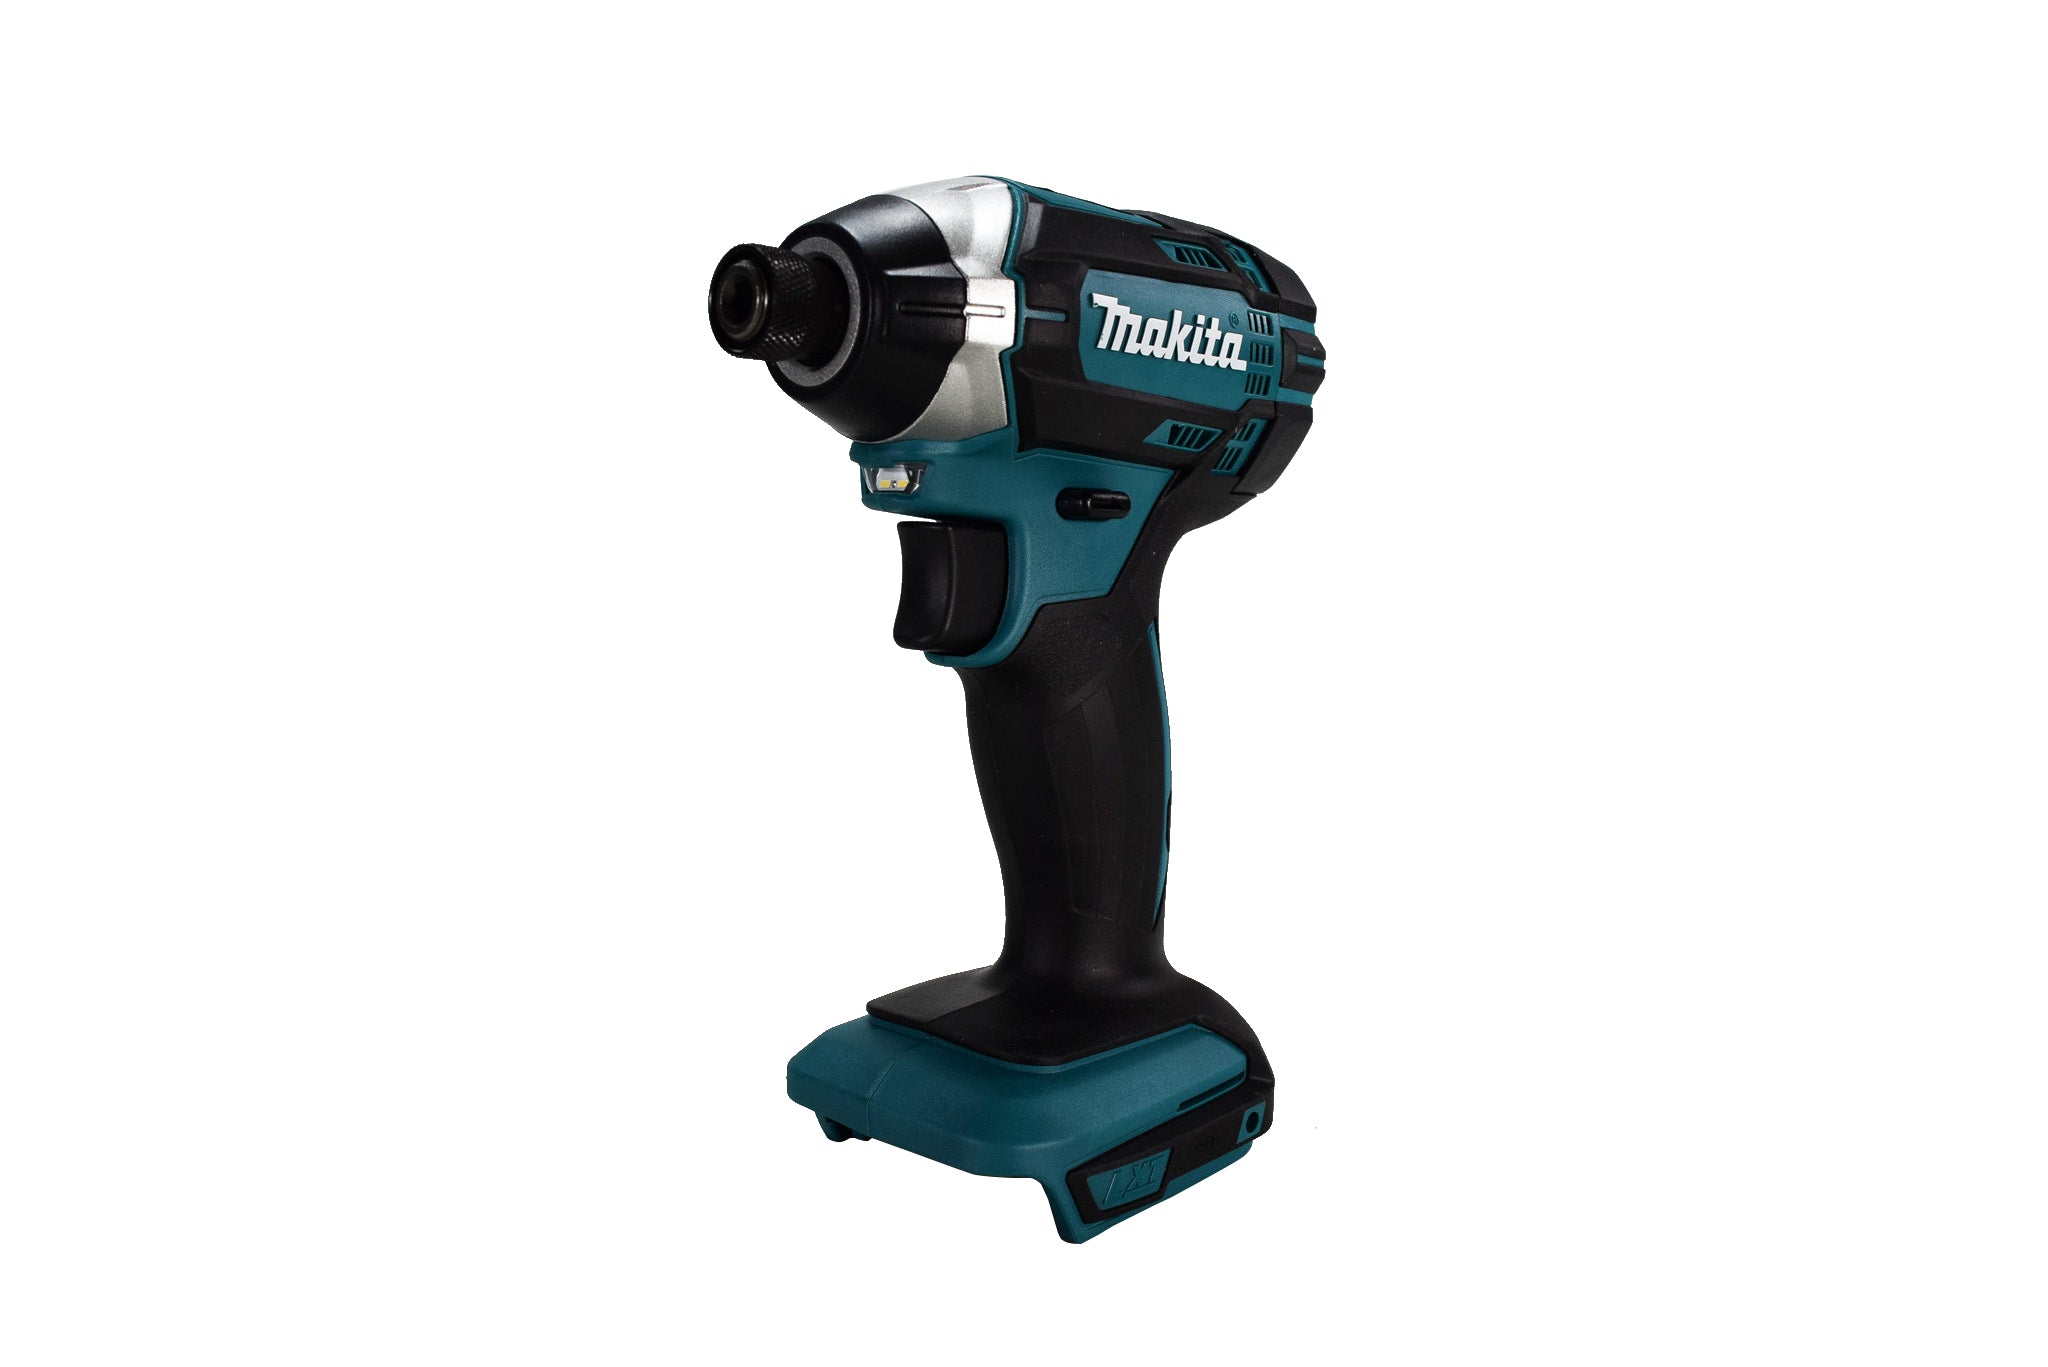 Makita XDT11Z-NBX 18V LXT Cordless Lithium-Ion 1/4-inch Hex Impact Driver (Tool Only)